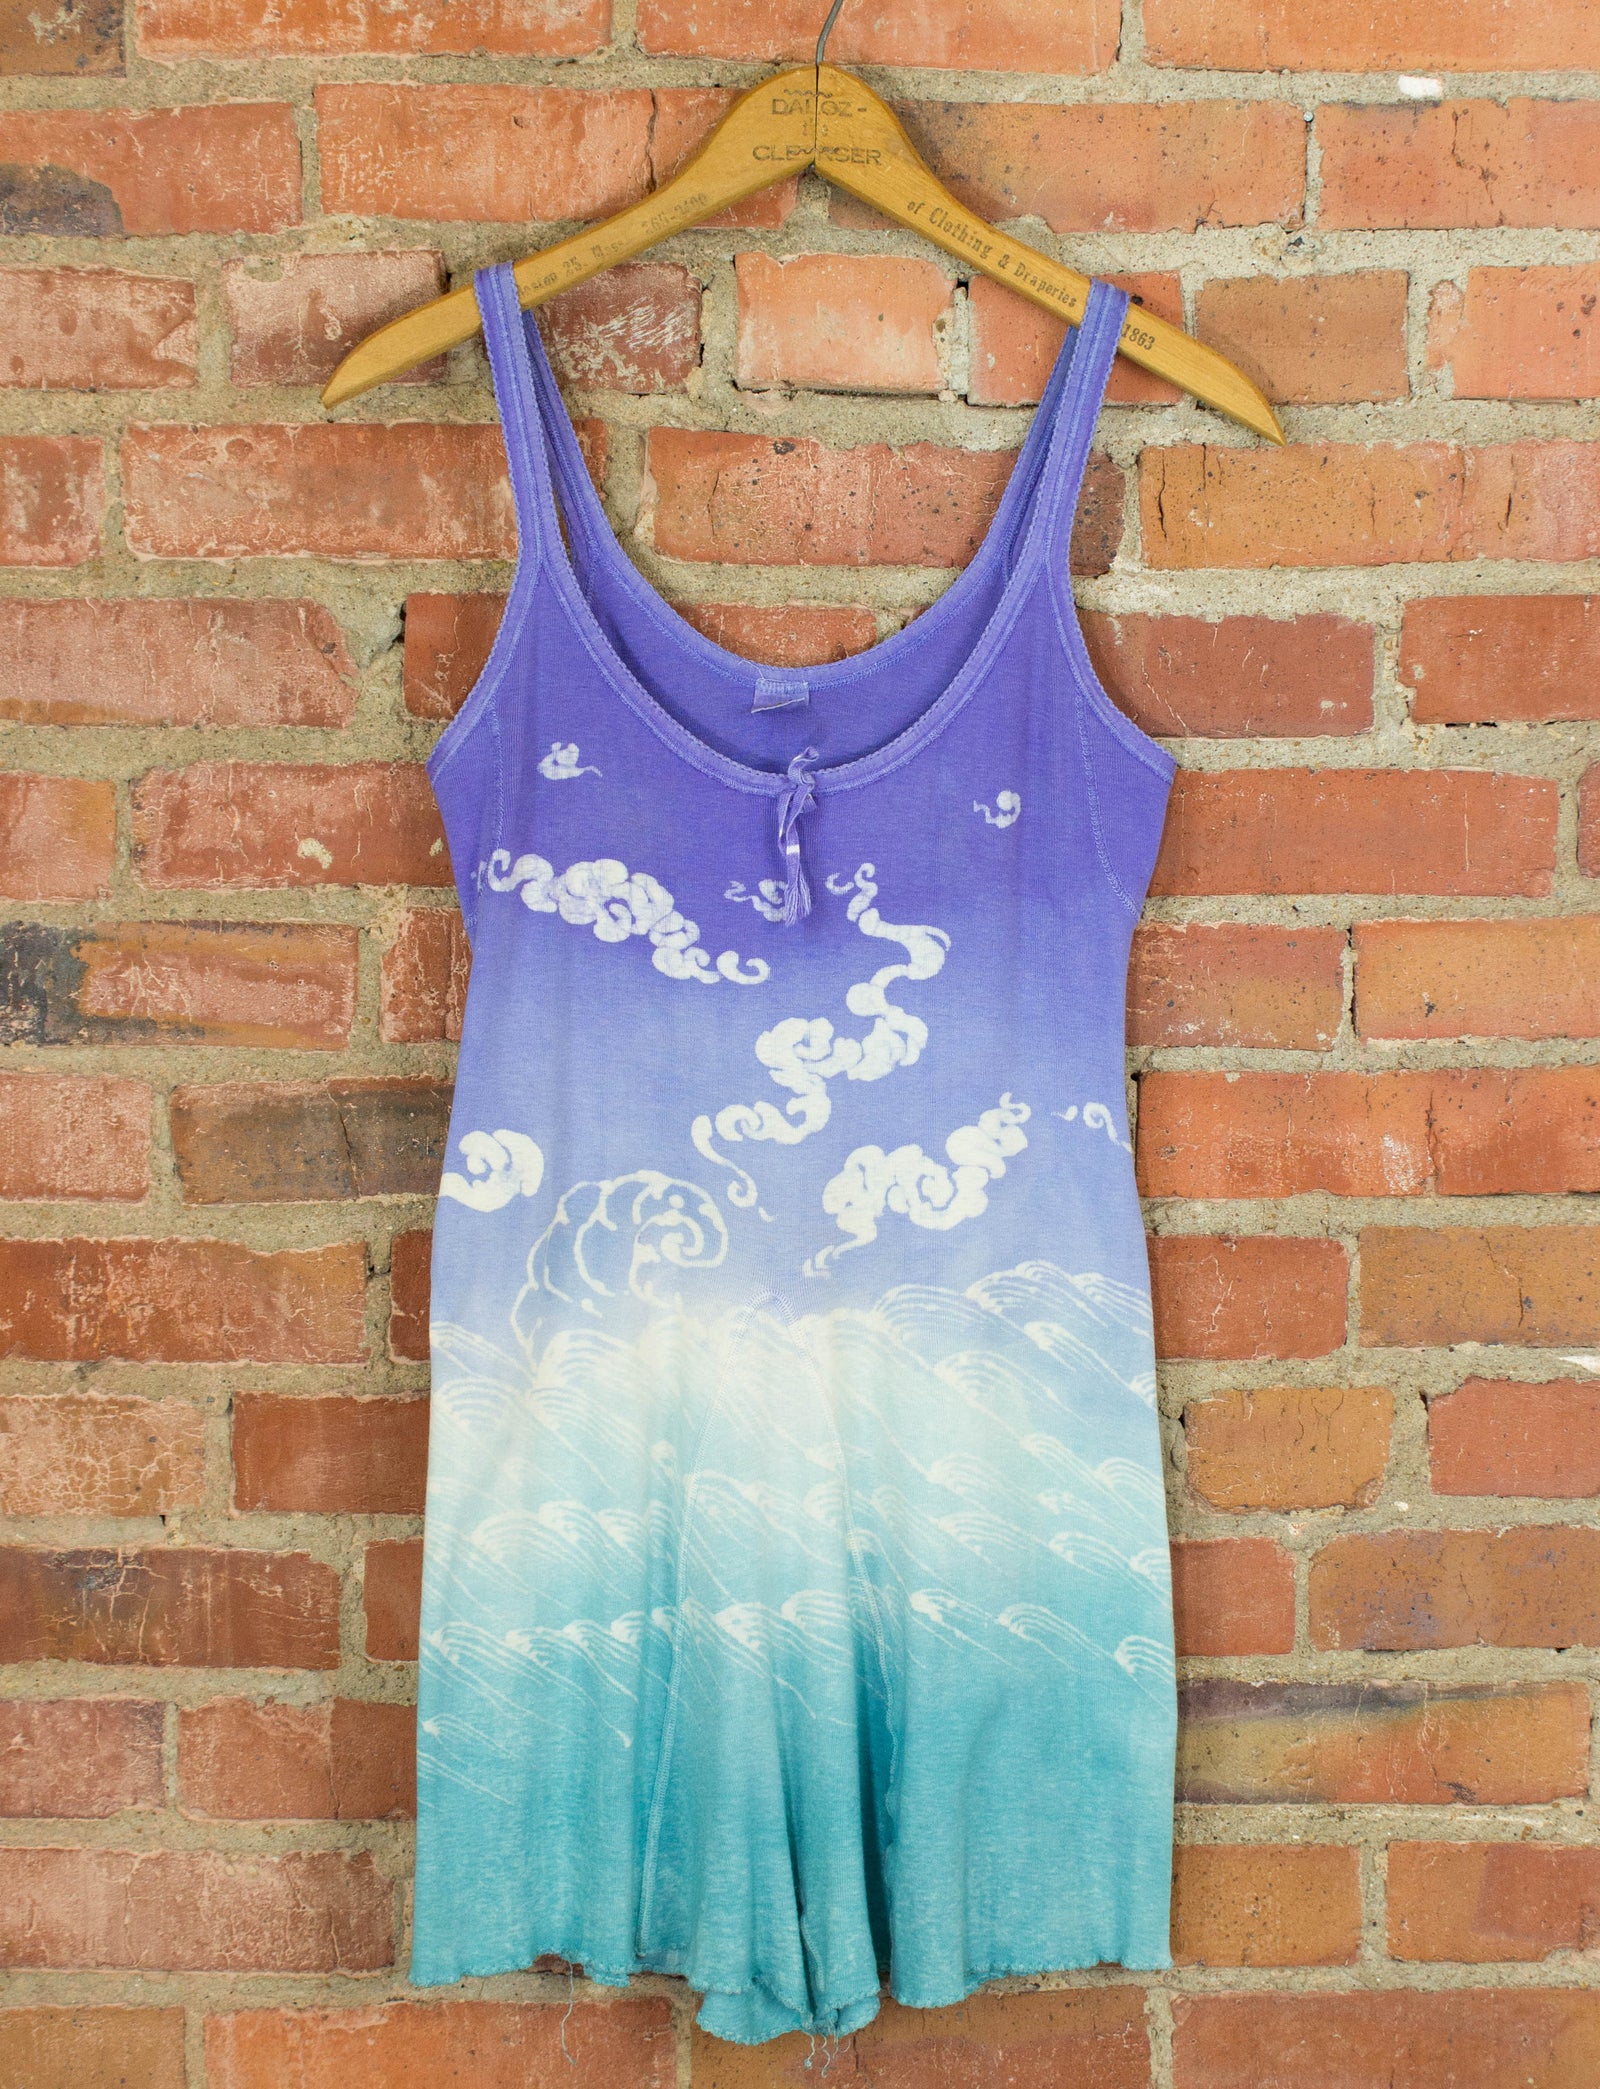 Vintage Mihitabel Women's Tie Dye Romper 60s Purple and Aqua With Cloud and Wave Designs Small